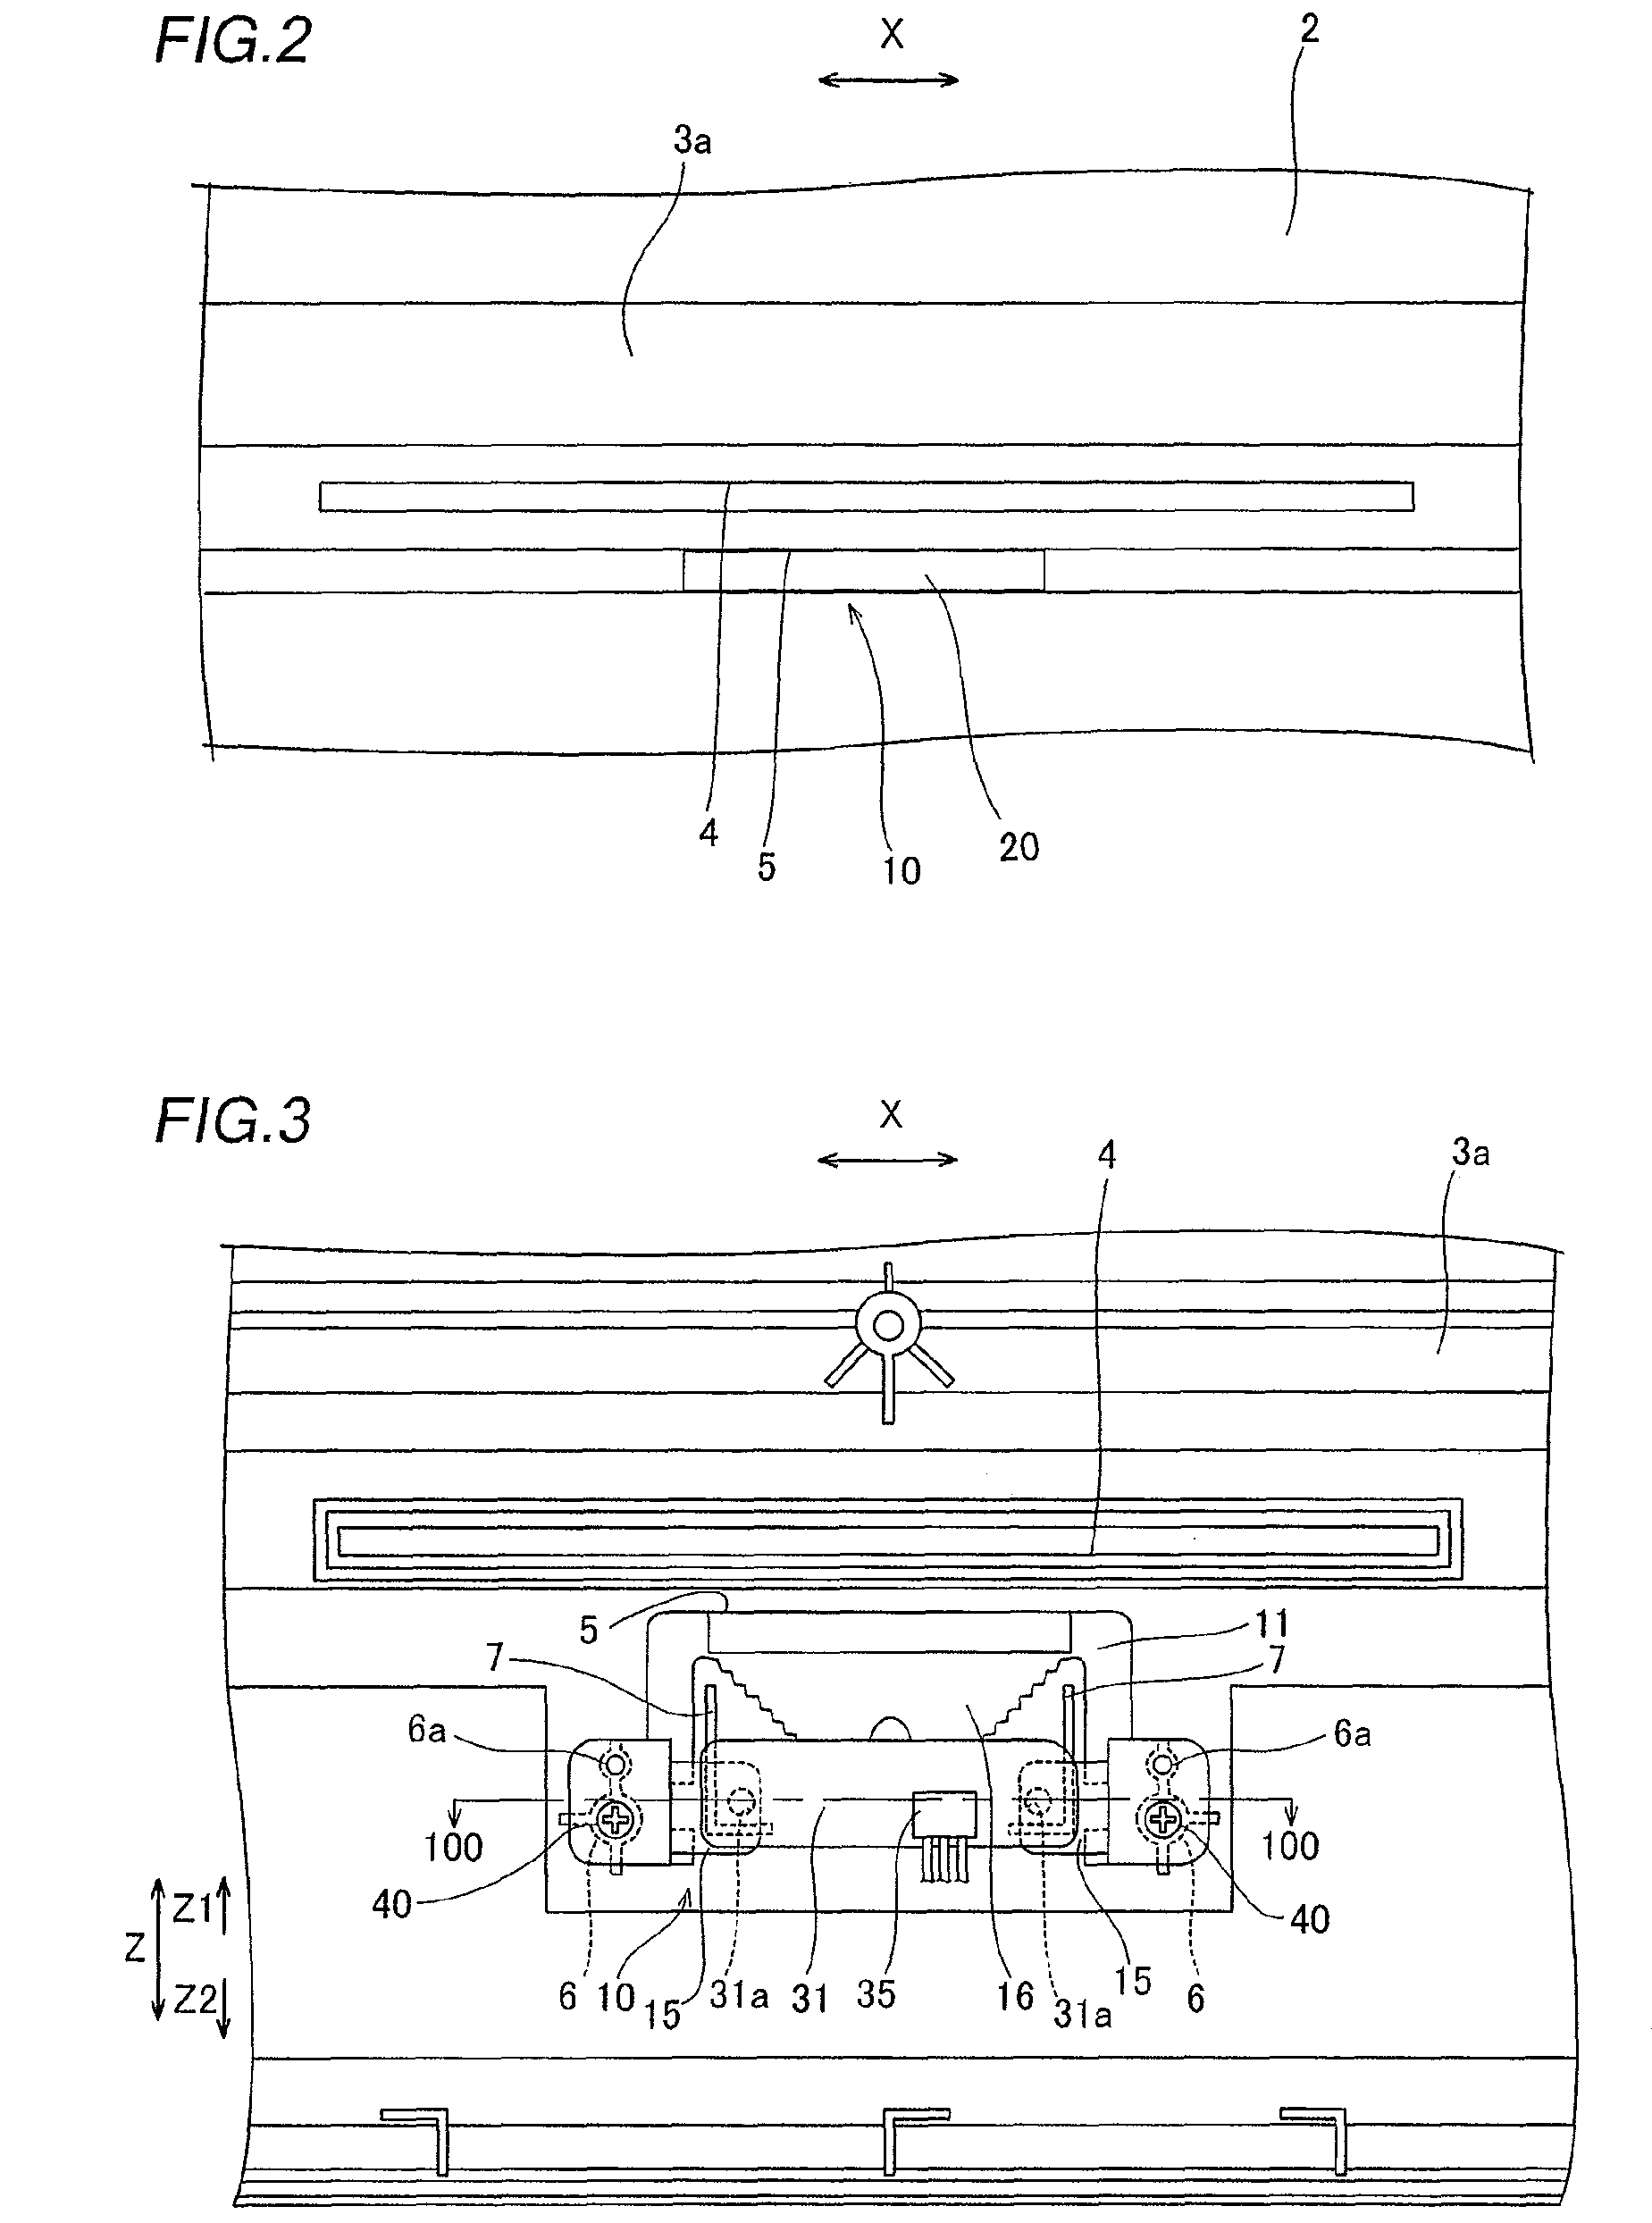 Structure for mounting indicator unit on electronic apparatus